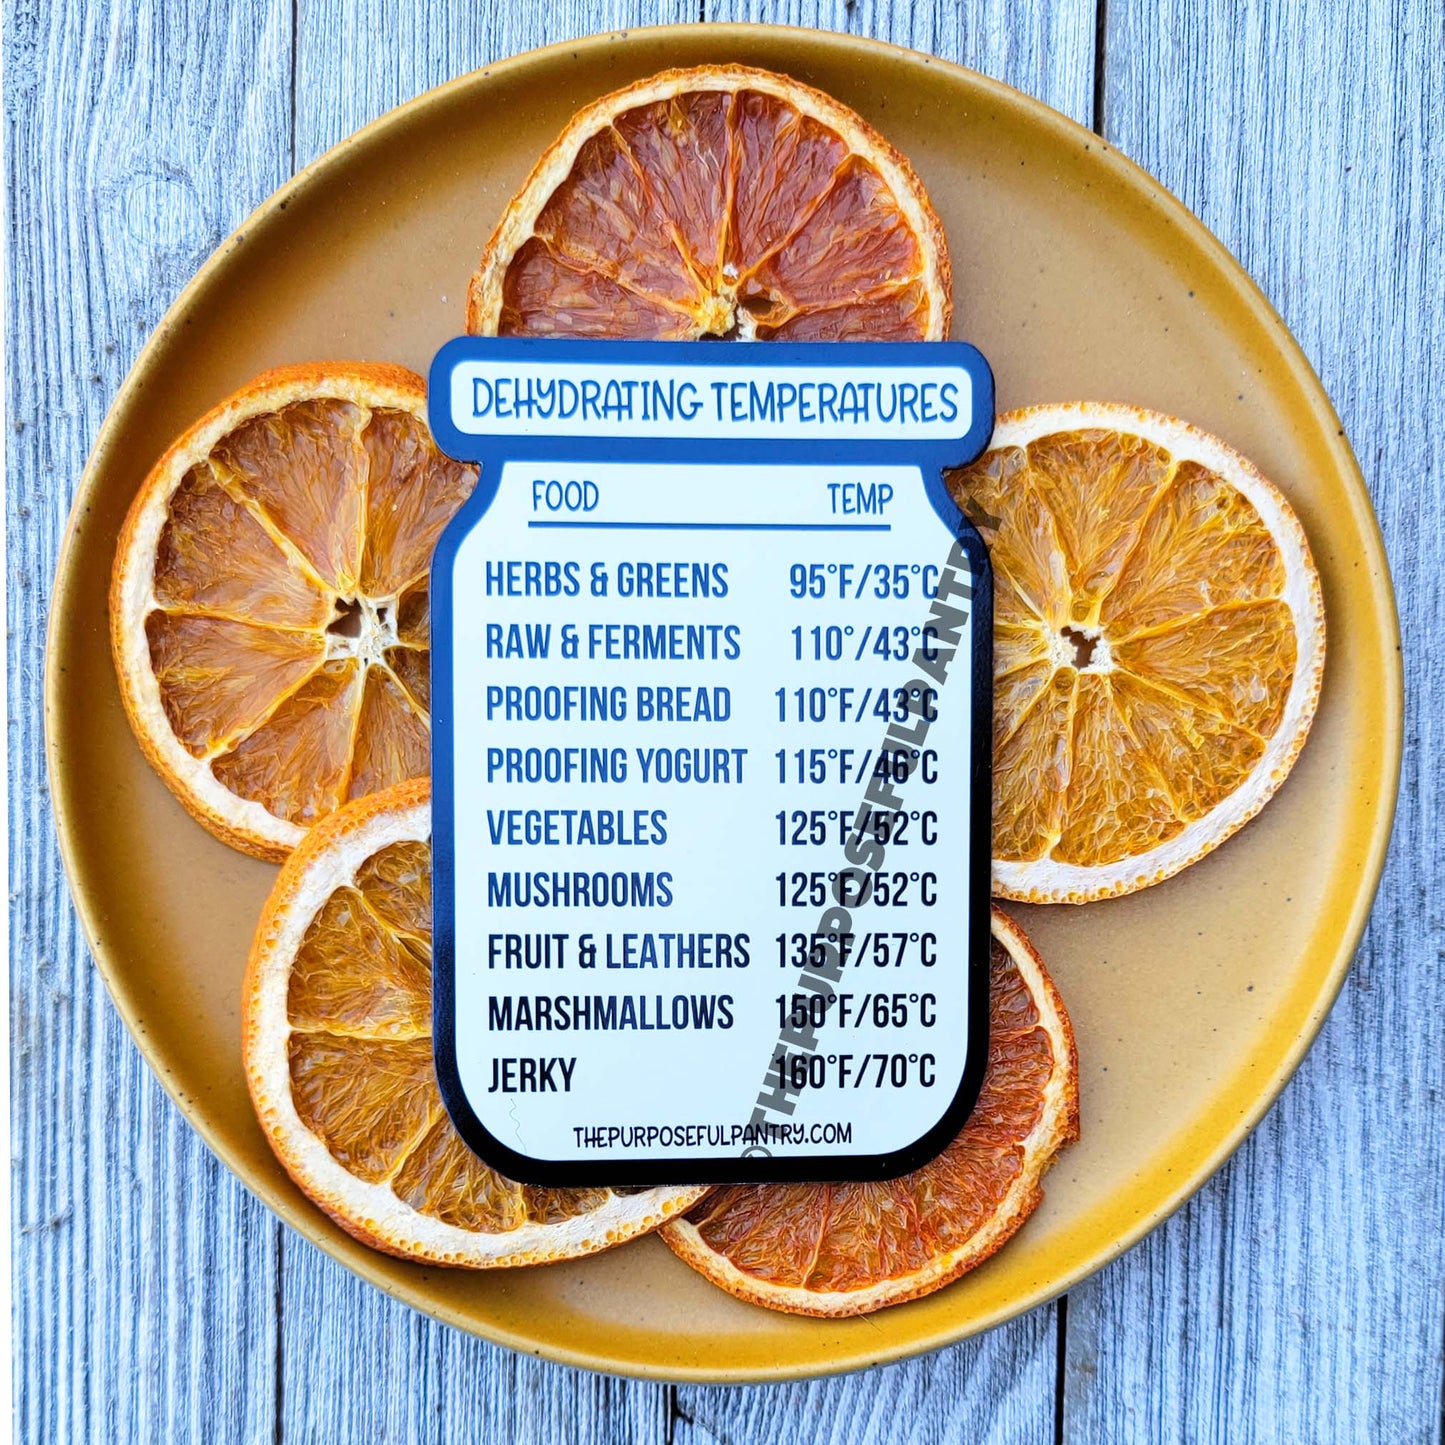 A plate of orange slices with The Purposeful Pantry's Beginners Dehydrating Toolbox Bundle label on it.